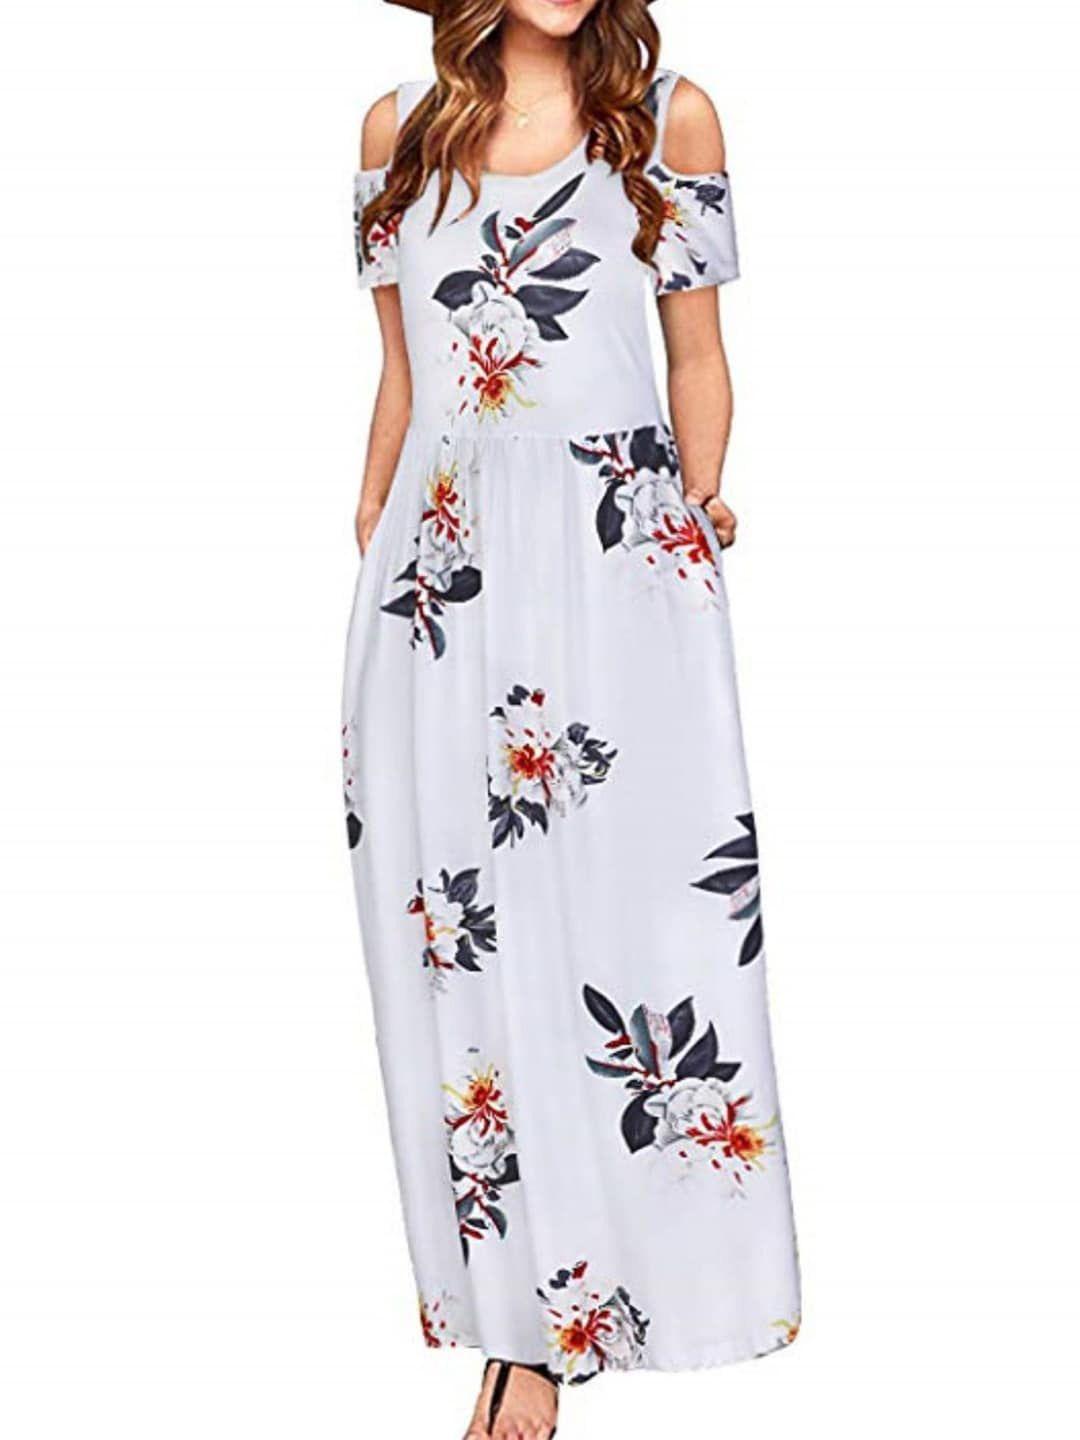 stylecast x kpop floral printed round neck cold-shoulder gathered party maxi dress